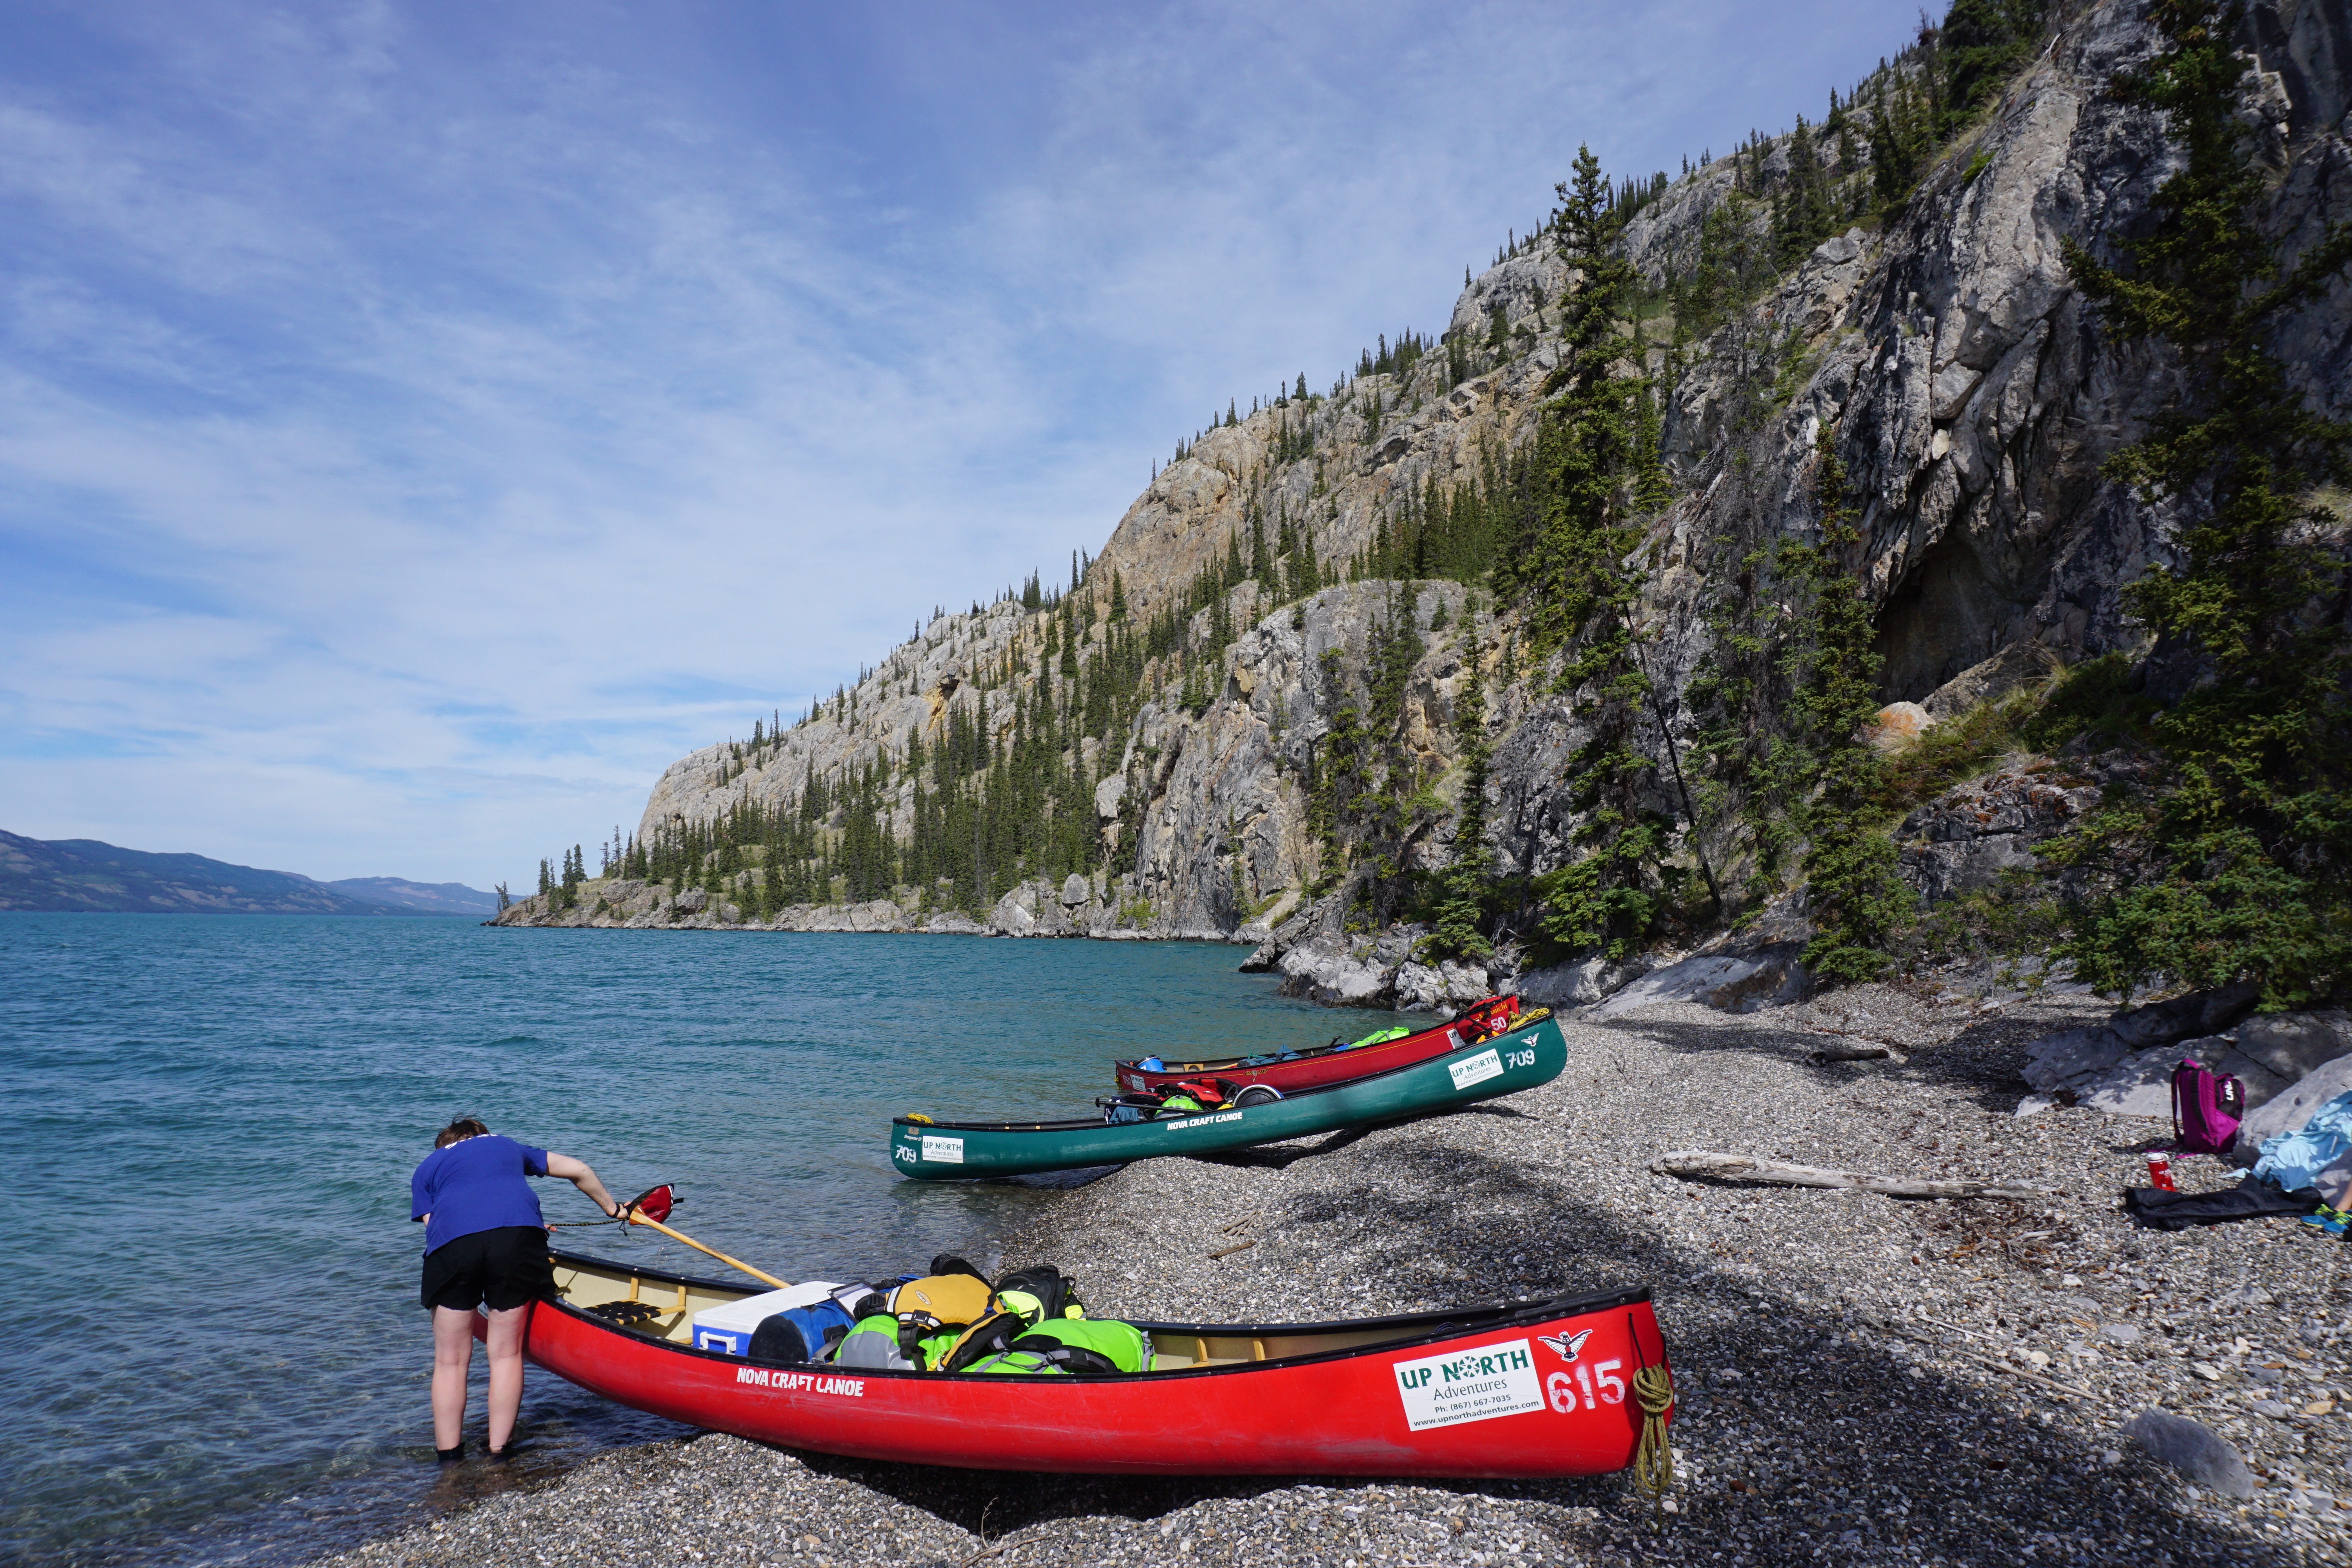 Yukon River Expedition - 19 Days by Up North Adventures - Image 39